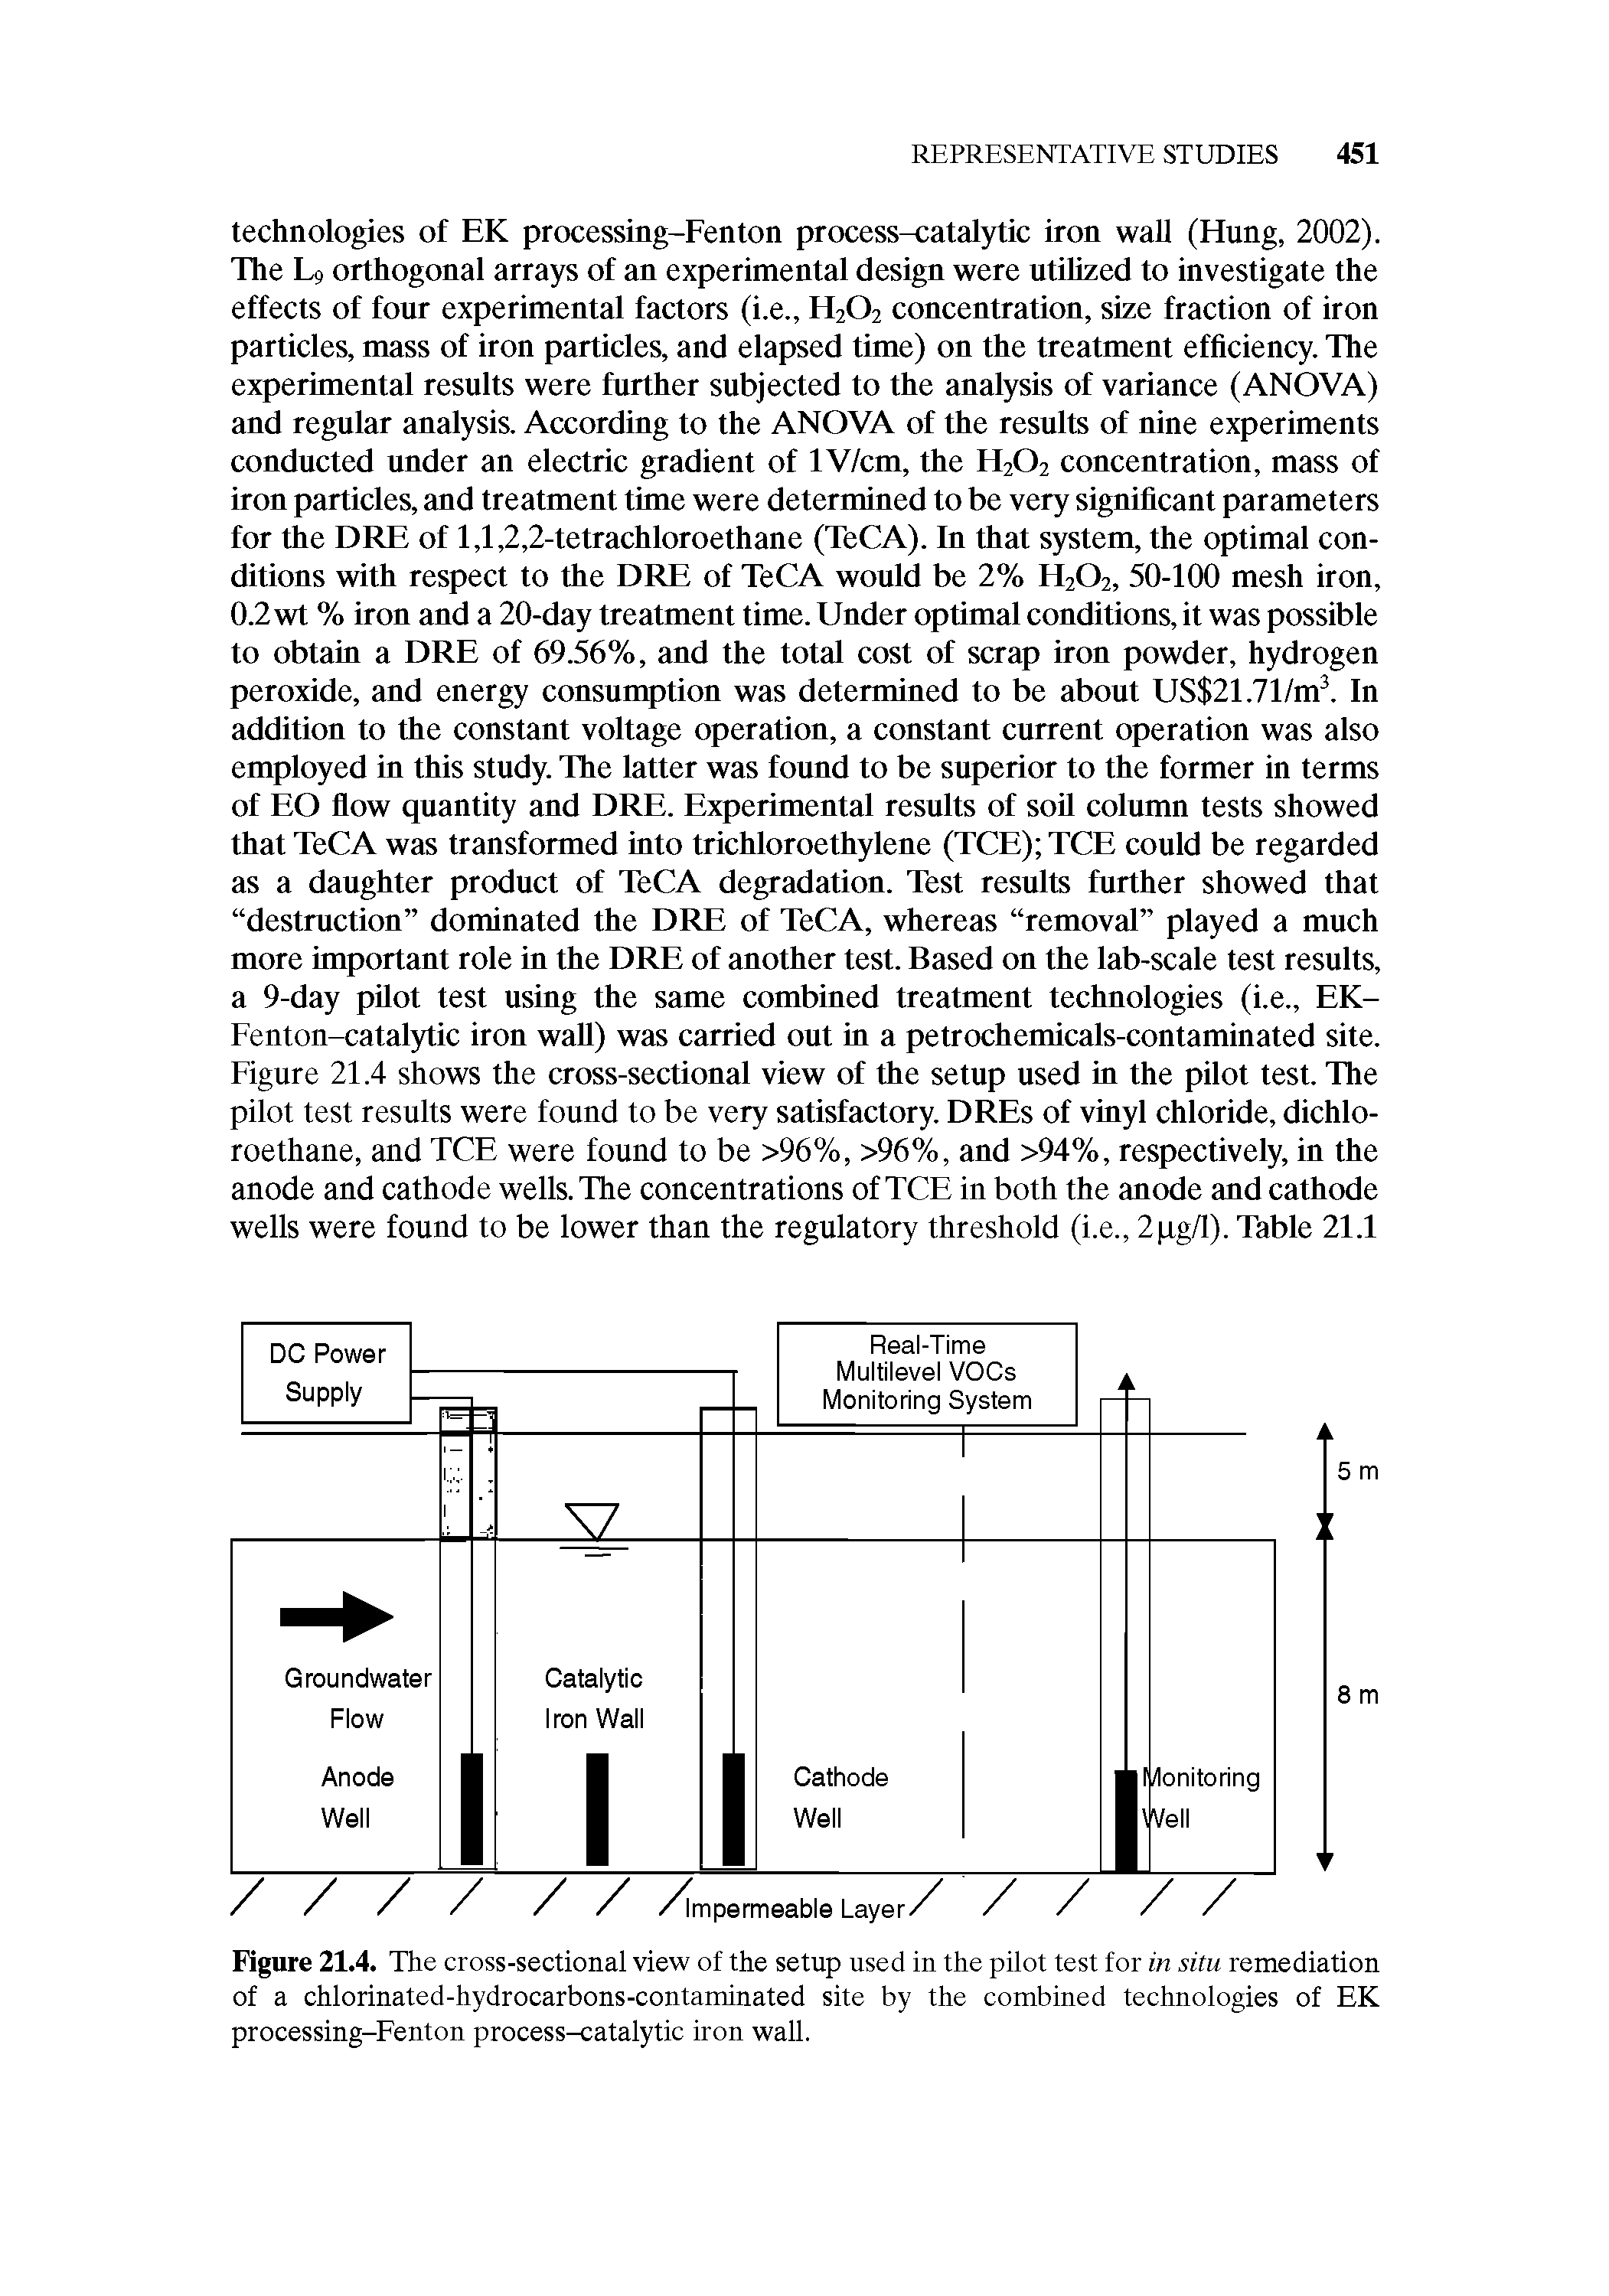 Figure 21.4. The cross-sectional view of the setup used in the pilot test for in situ remediation of a chlorinated-hydrocarbons-contaminated site by the combined technologies of EK processing-Fenton process-catalytic iron wall.